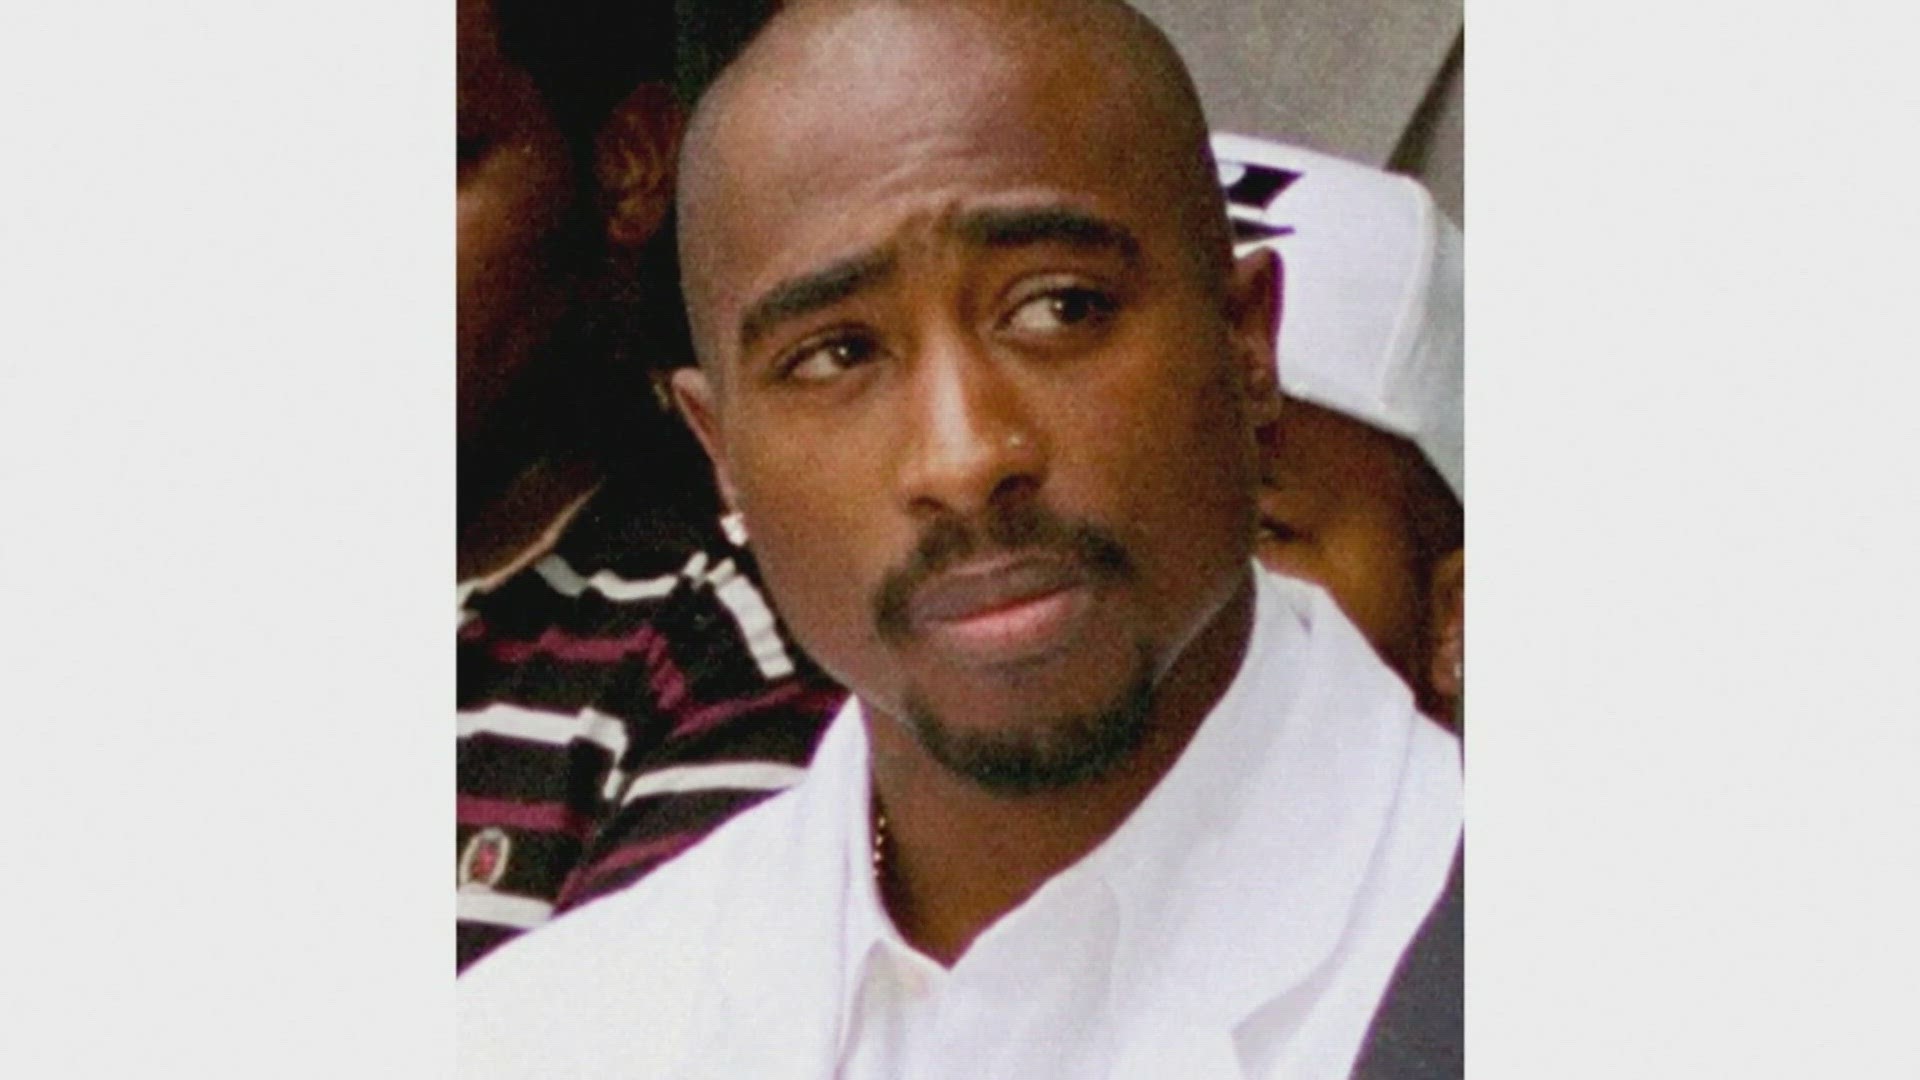 It's considered one of the biggest unsolved cases in hip-hop history. Now a man is in custody, accused of murdering rapper Tupac Shakur.